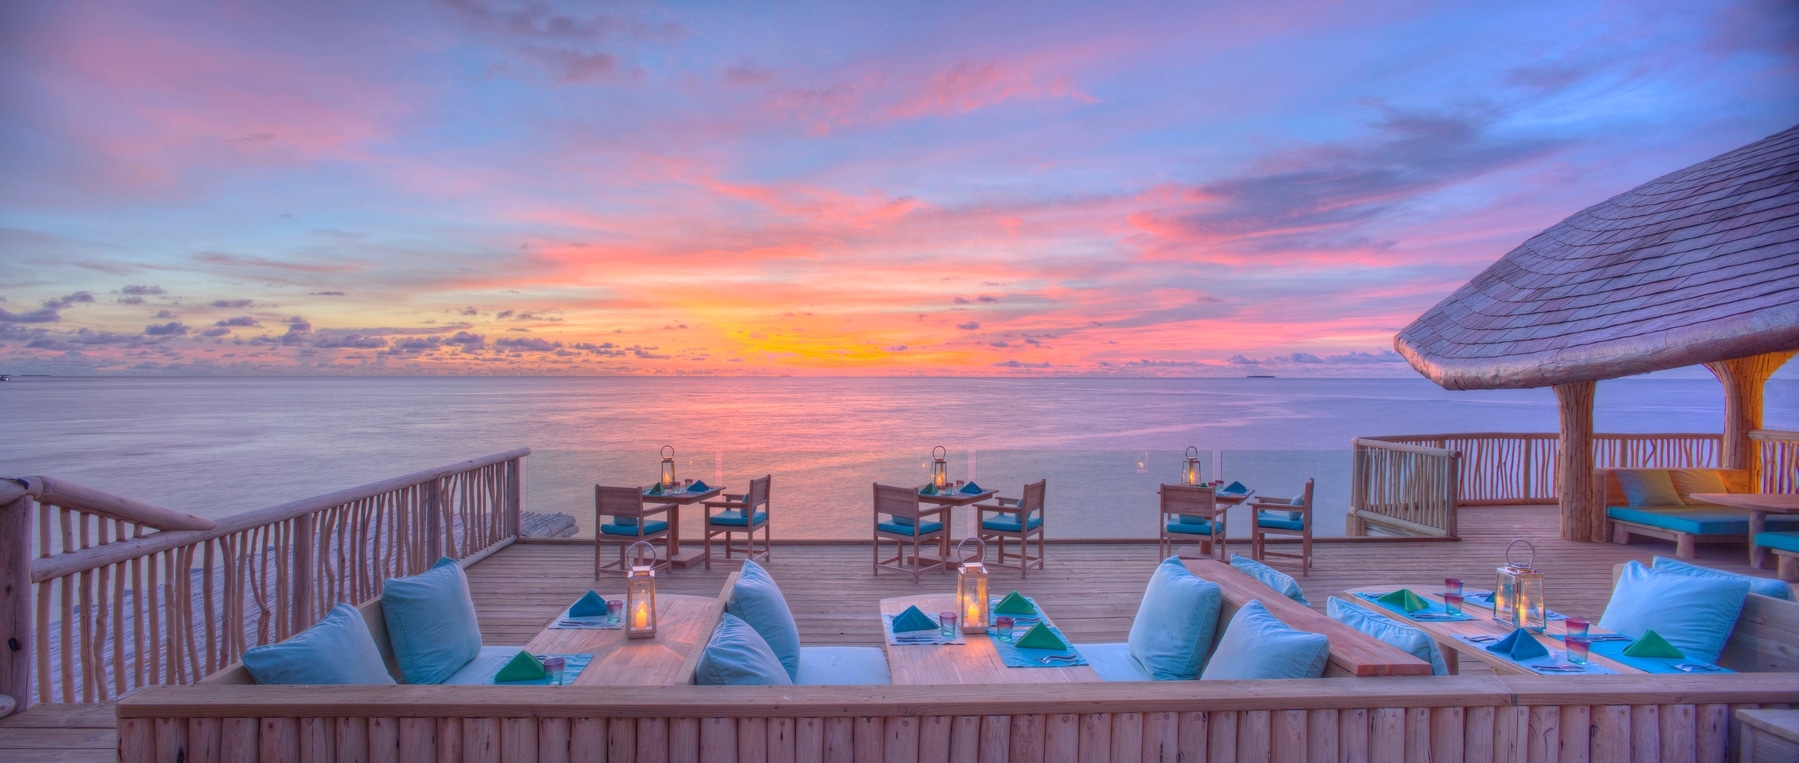 Dining, Out of the Blue at Soneva Fushi